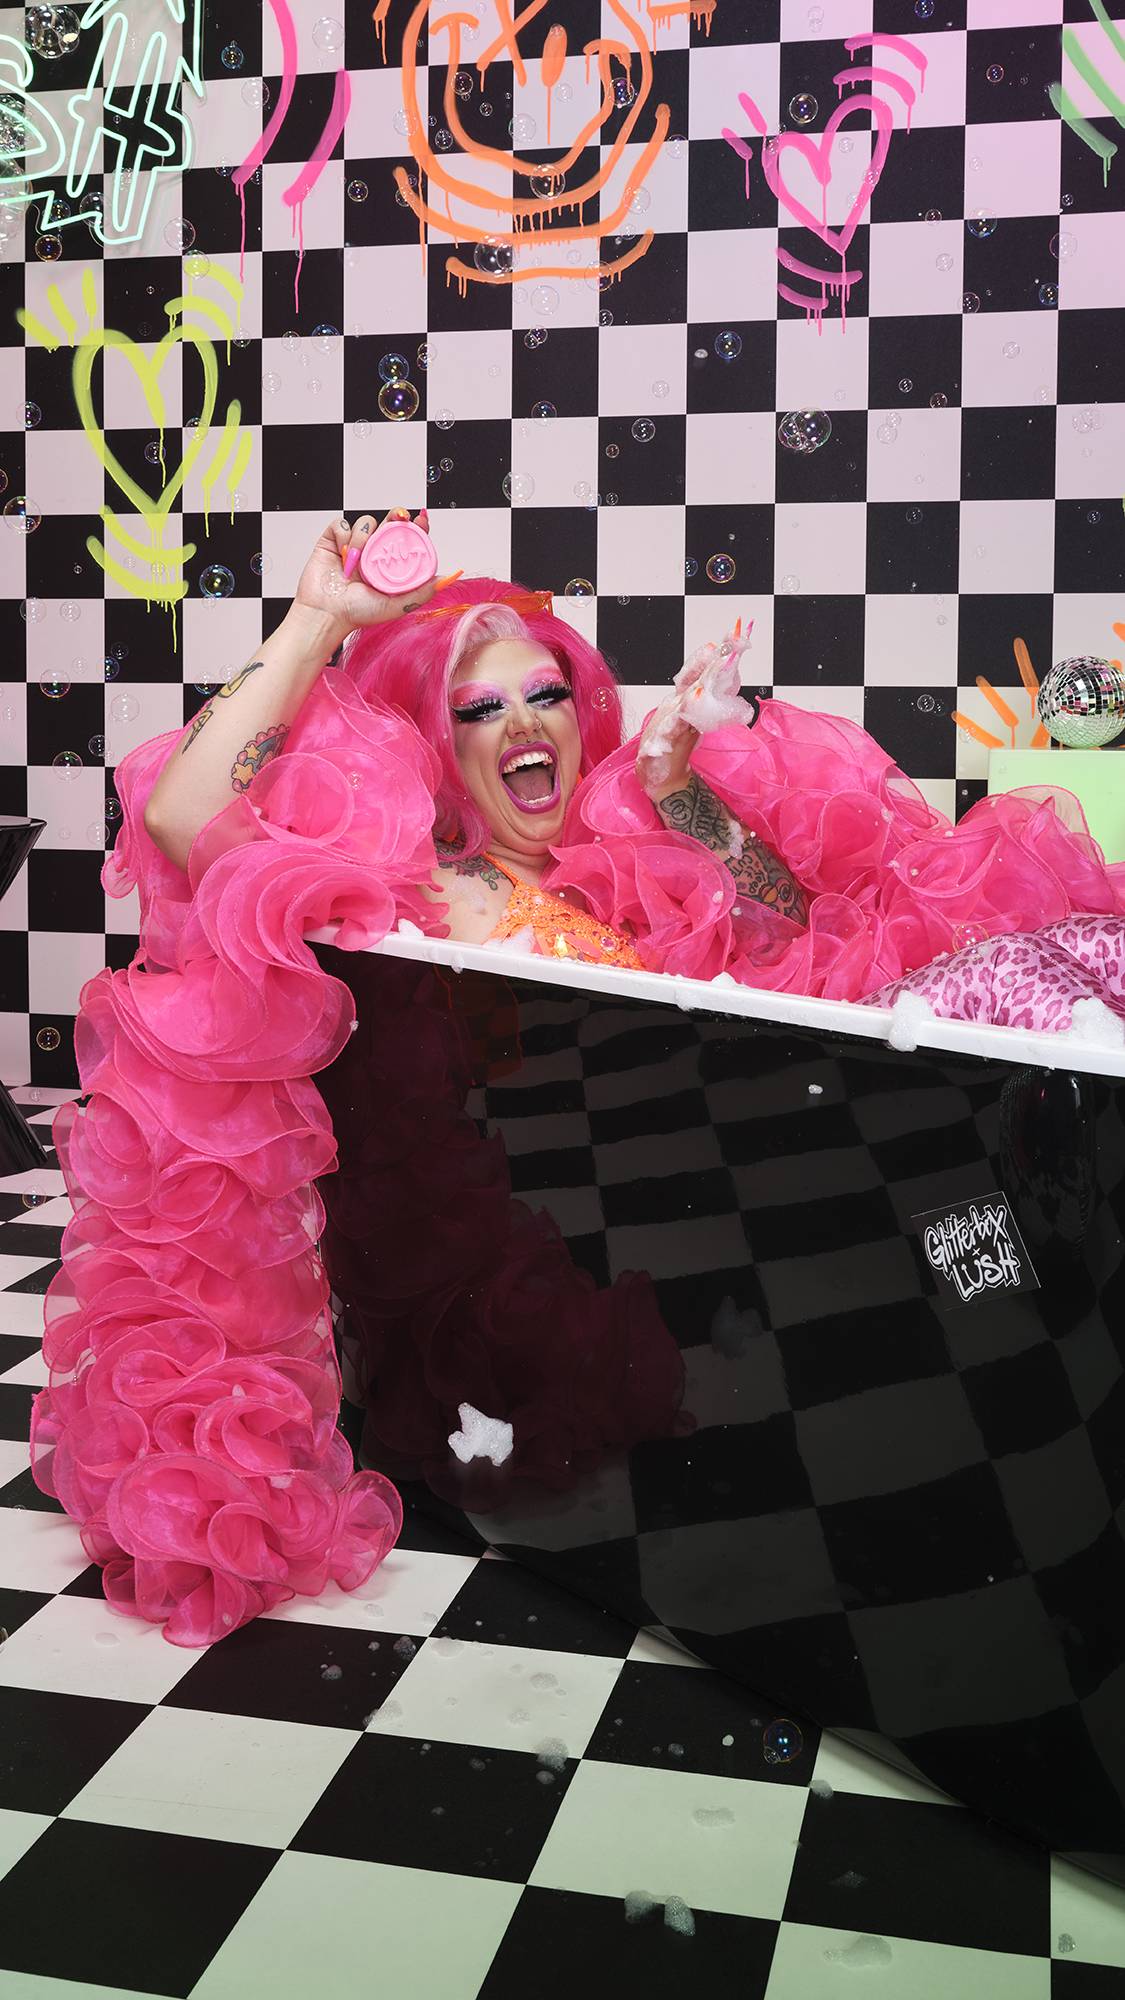 Model is in the bath with a pink ruffled scarf. They are smiling as they hold the bar in front of a checkered and neon wall.